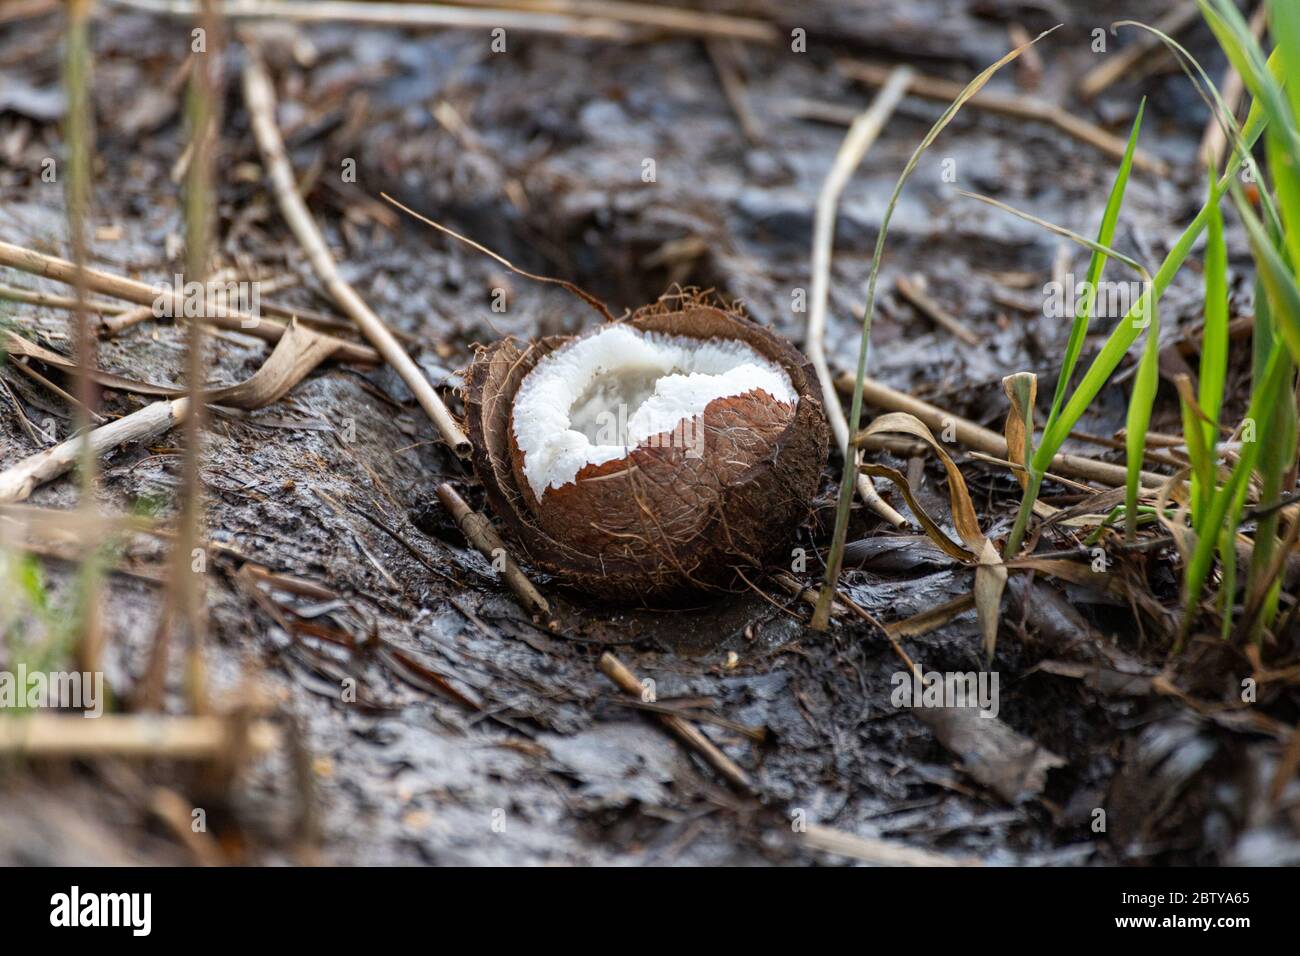 Broken coconut shell on the ground Stock Photo